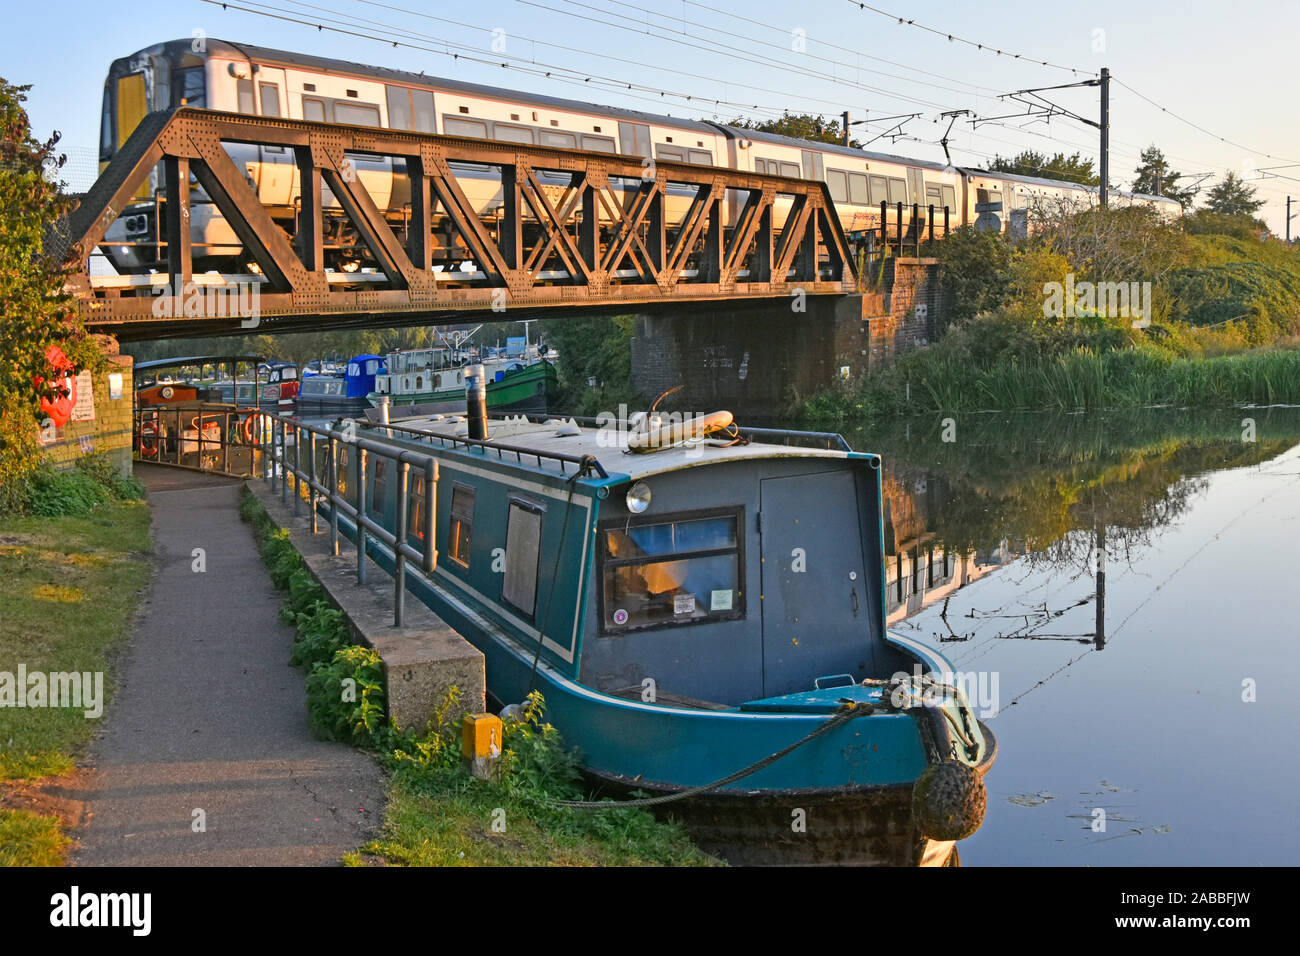 Stansted Express passenger train approaching Ely railway station on steel bridge above River Great Ouse narrowboat & towpath East Anglia England UK Stock Photo